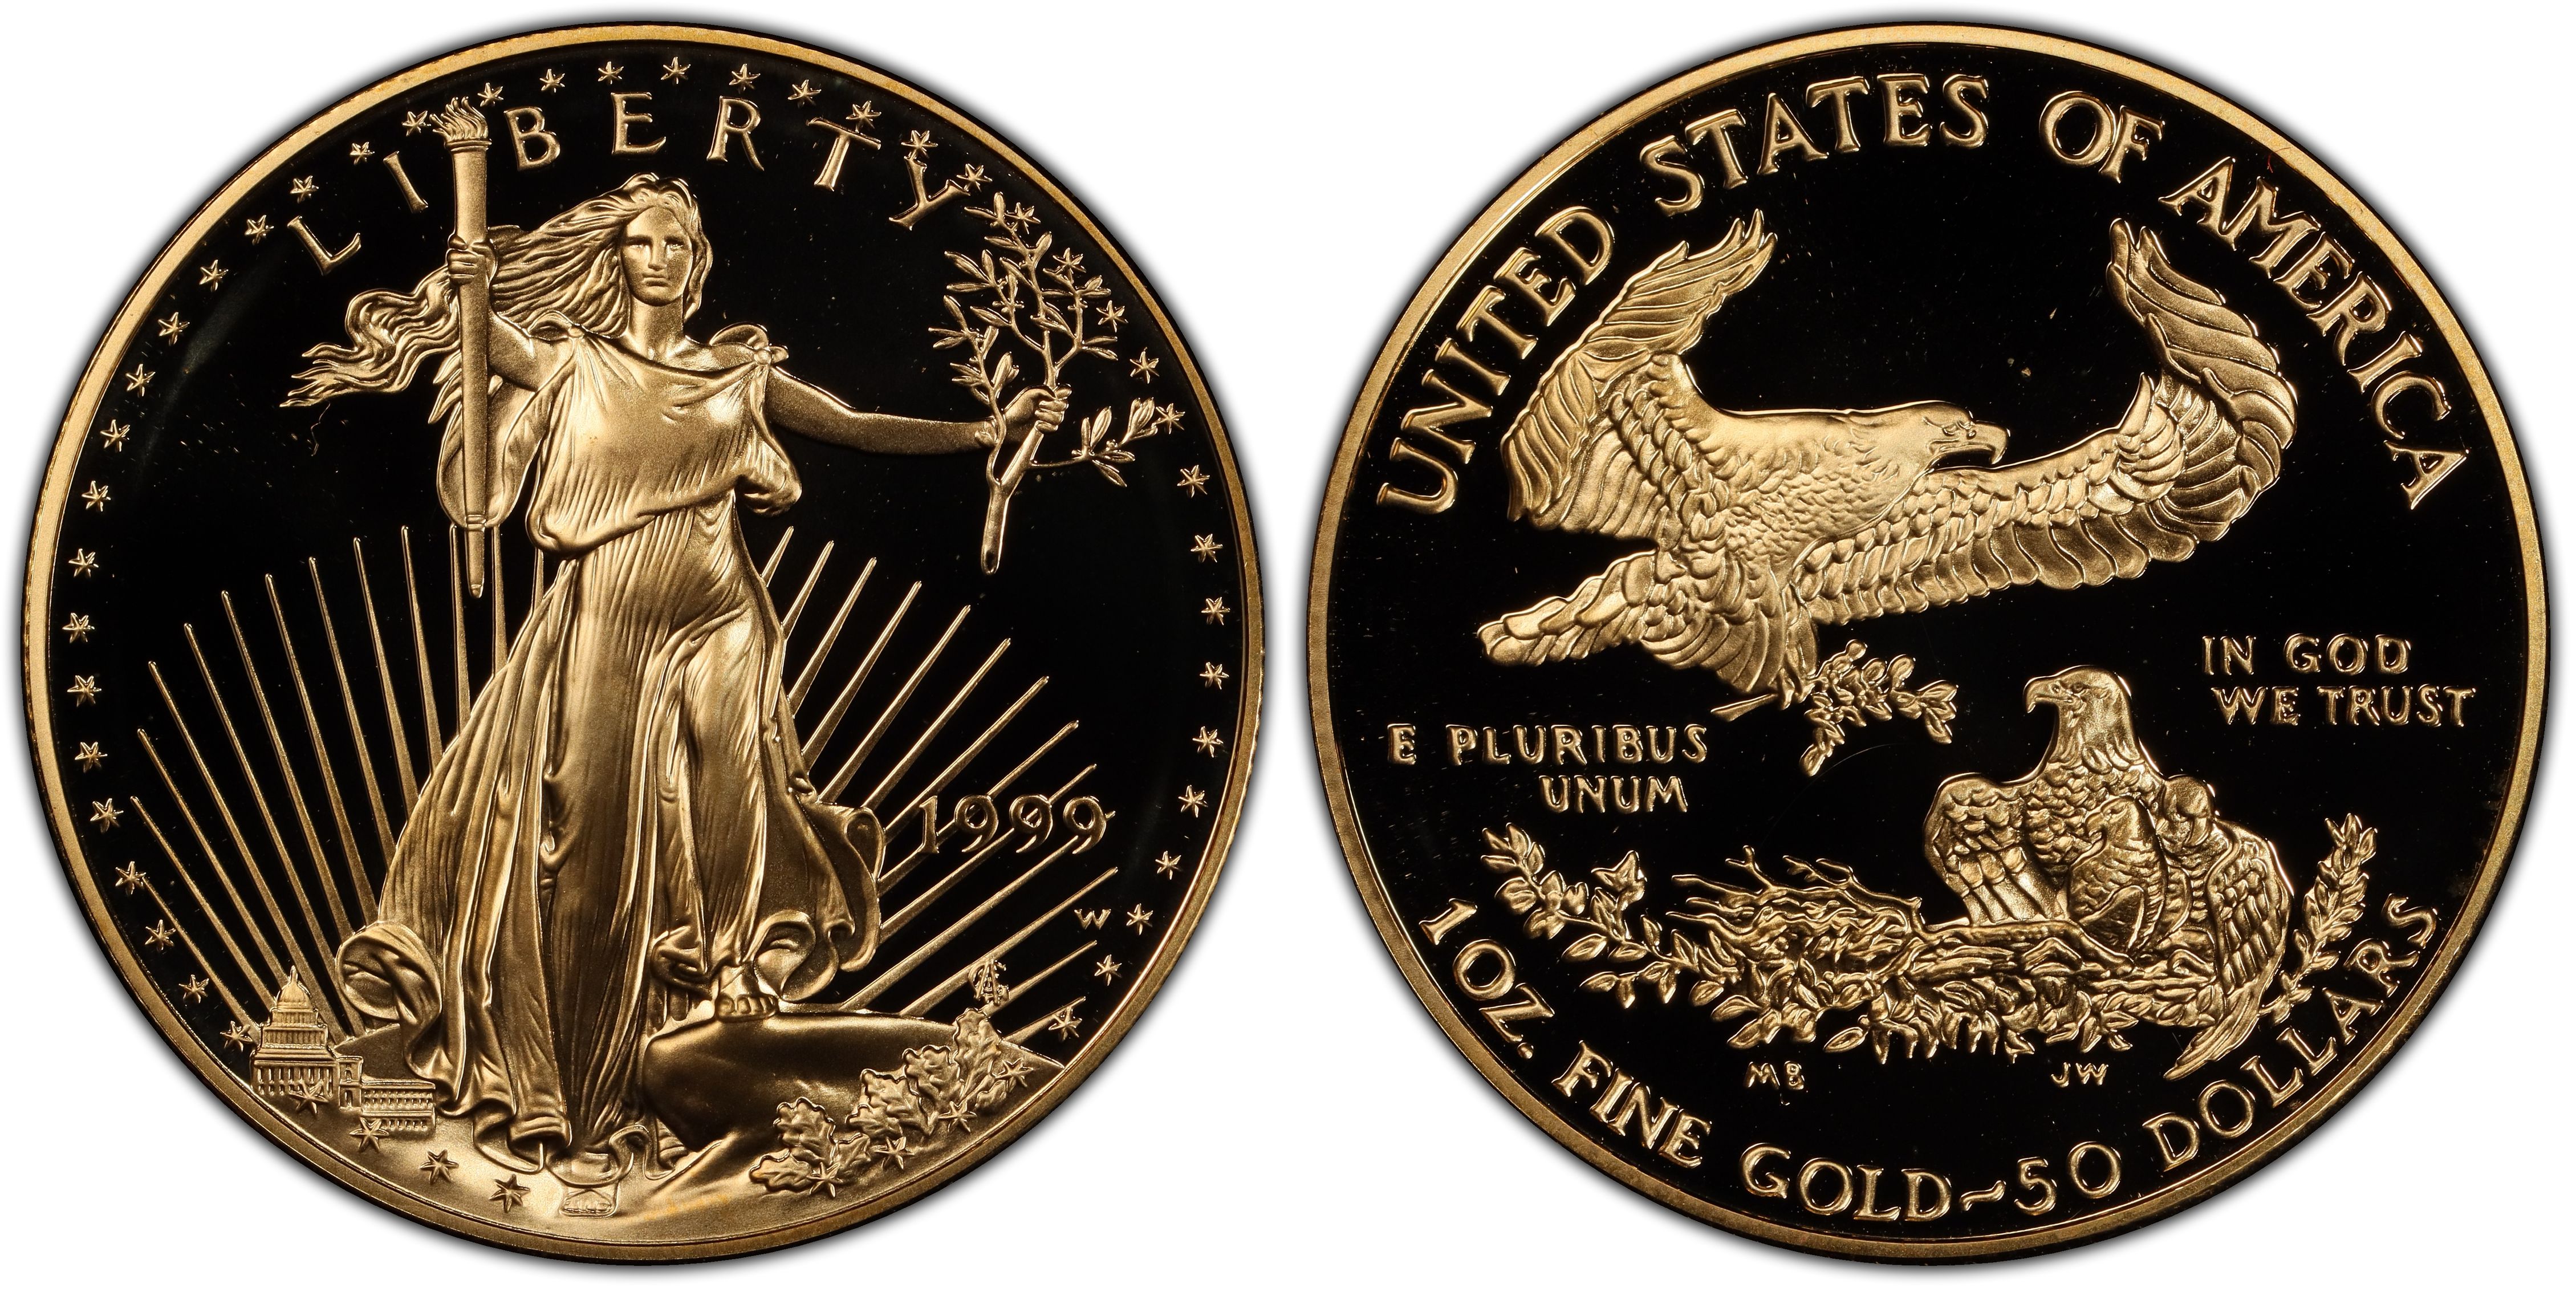 1999-W $50 Gold Eagle, DCAM (Proof) Gold Eagles - PCGS CoinFacts